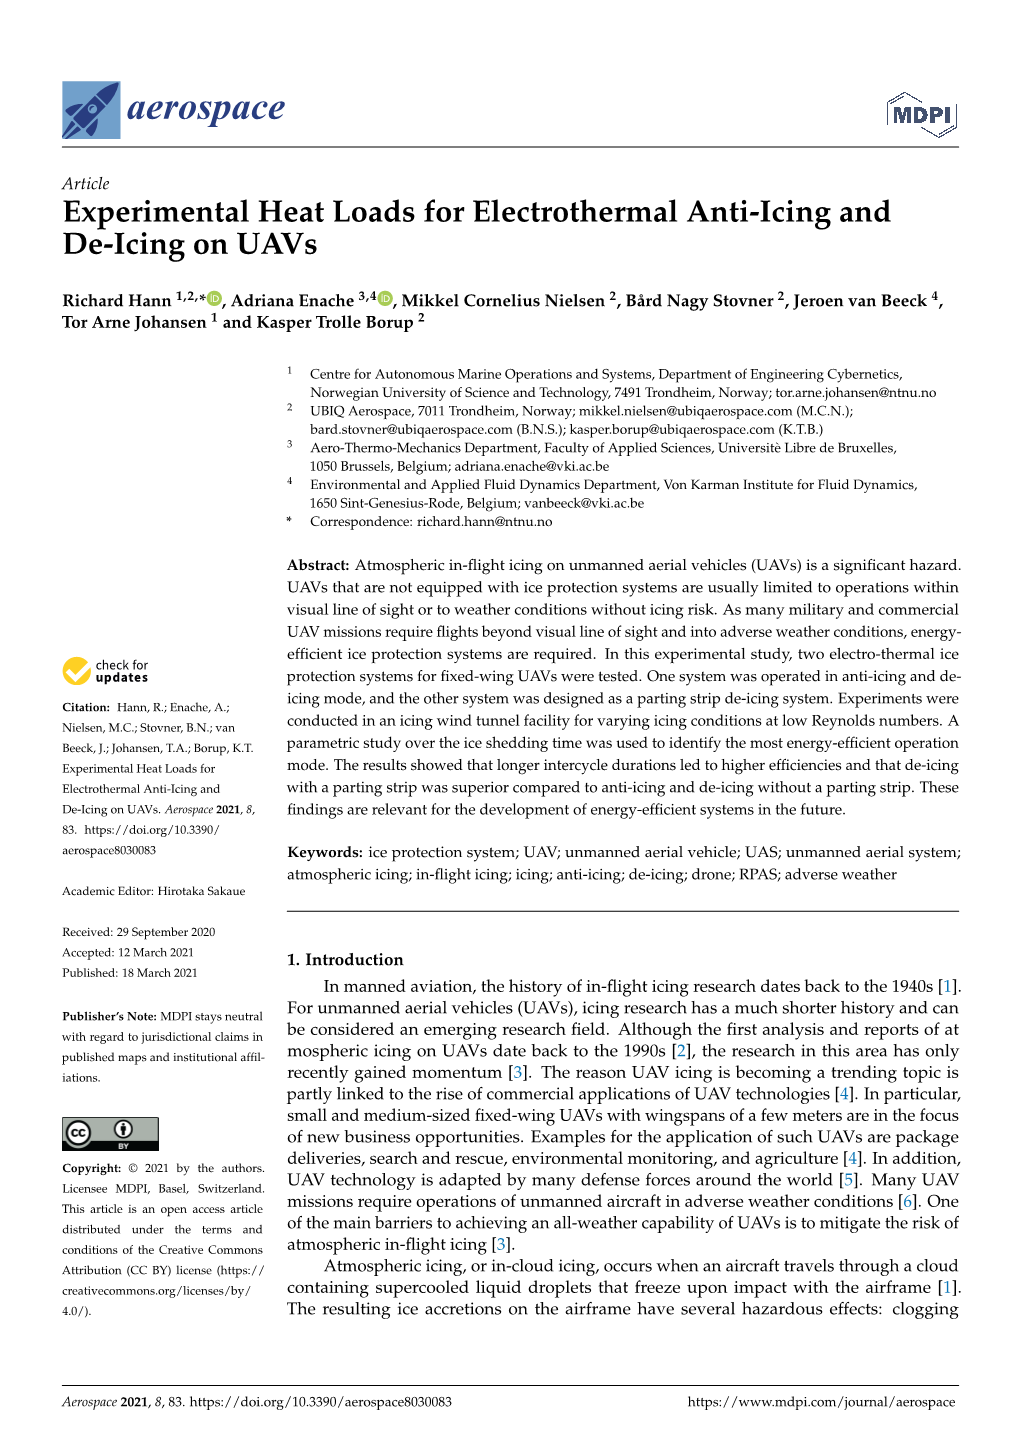 Experimental Heat Loads for Electrothermal Anti-Icing and De-Icing on Uavs